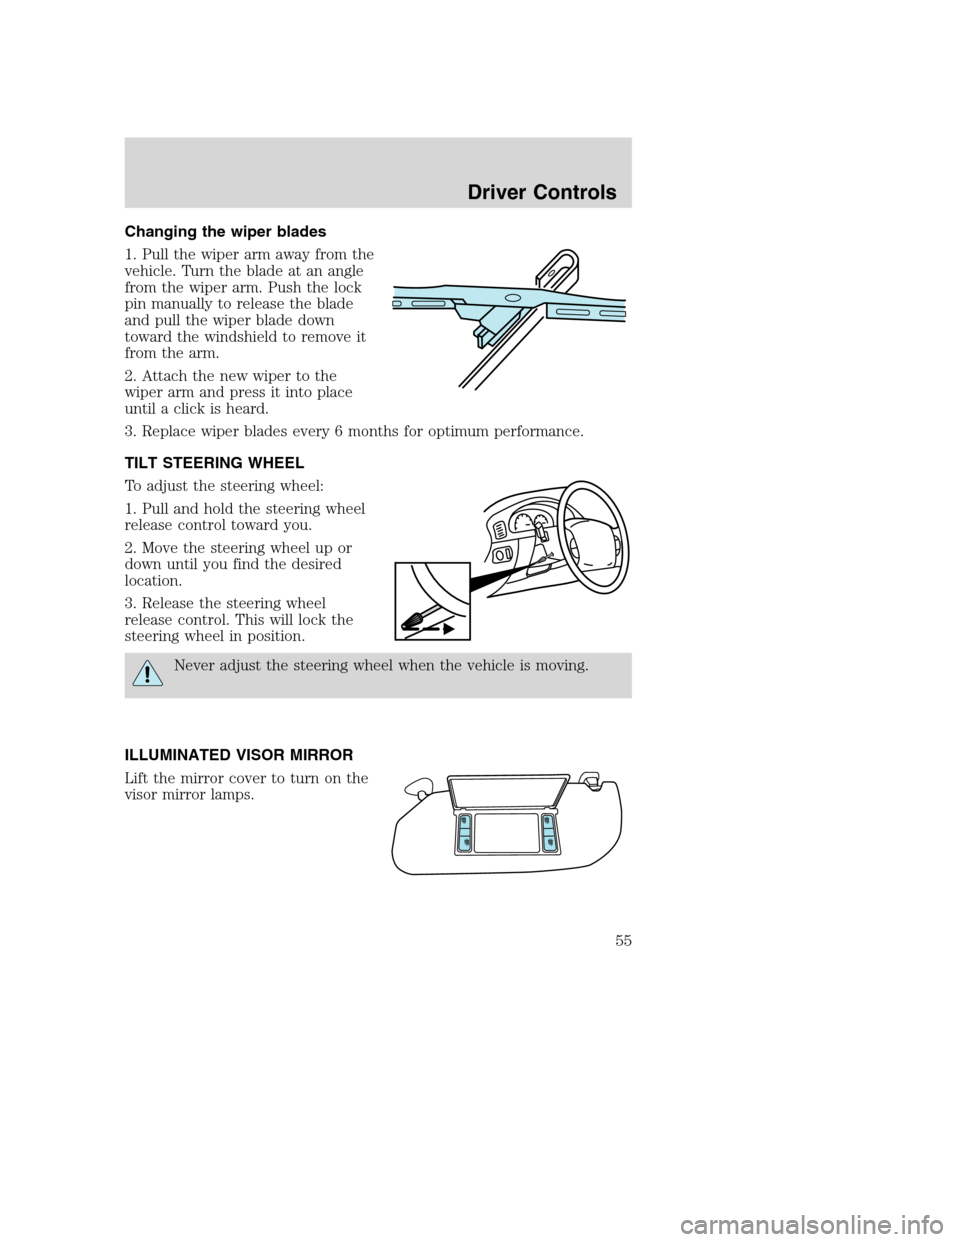 FORD EXCURSION 2003 1.G Owners Manual Changing the wiper blades
1. Pull the wiper arm away from the
vehicle. Turn the blade at an angle
from the wiper arm. Push the lock
pin manually to release the blade
and pull the wiper blade down
towa